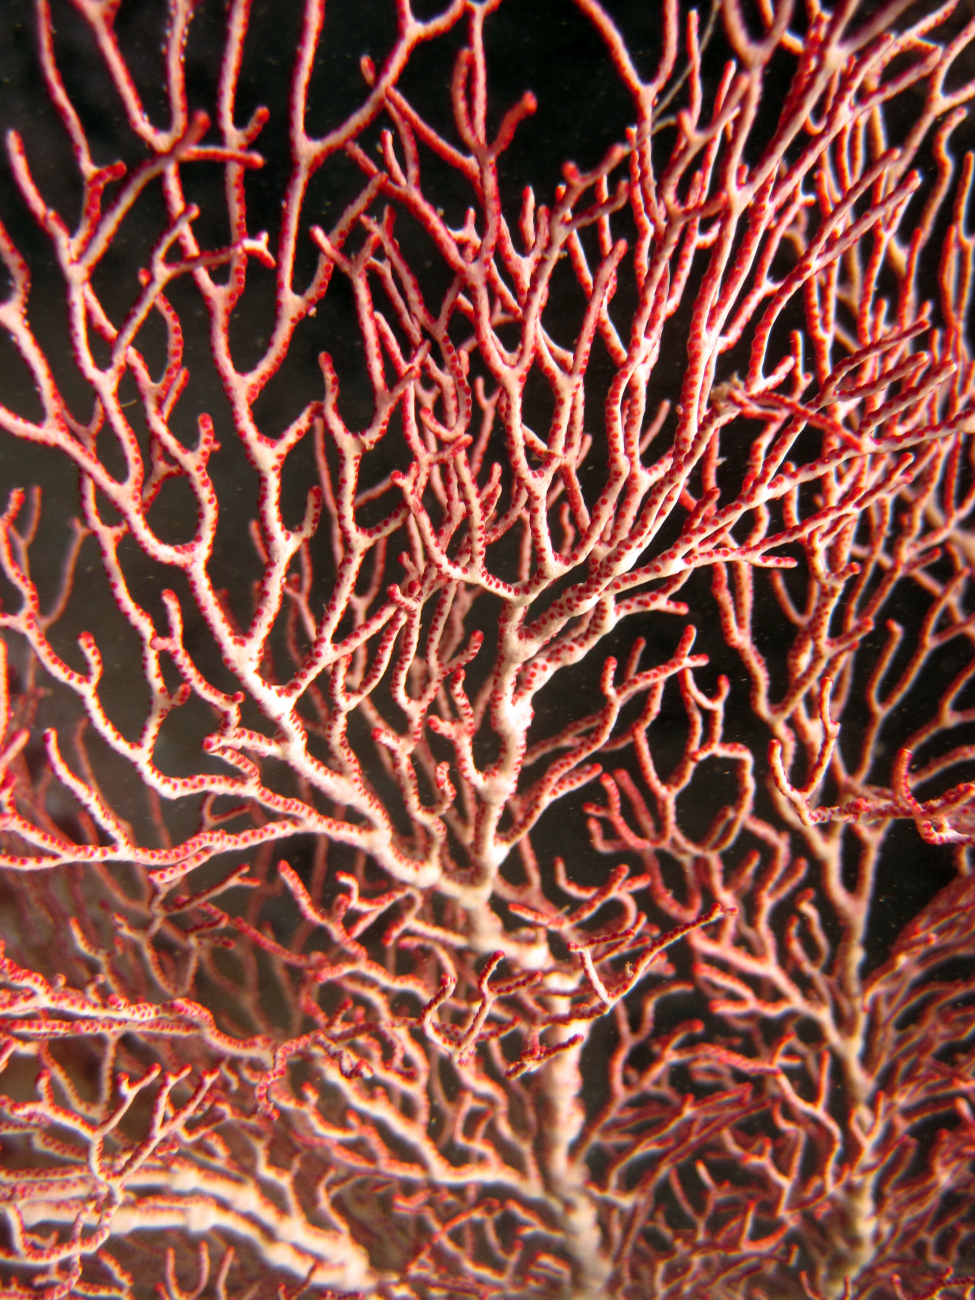 A red gorgonian coral